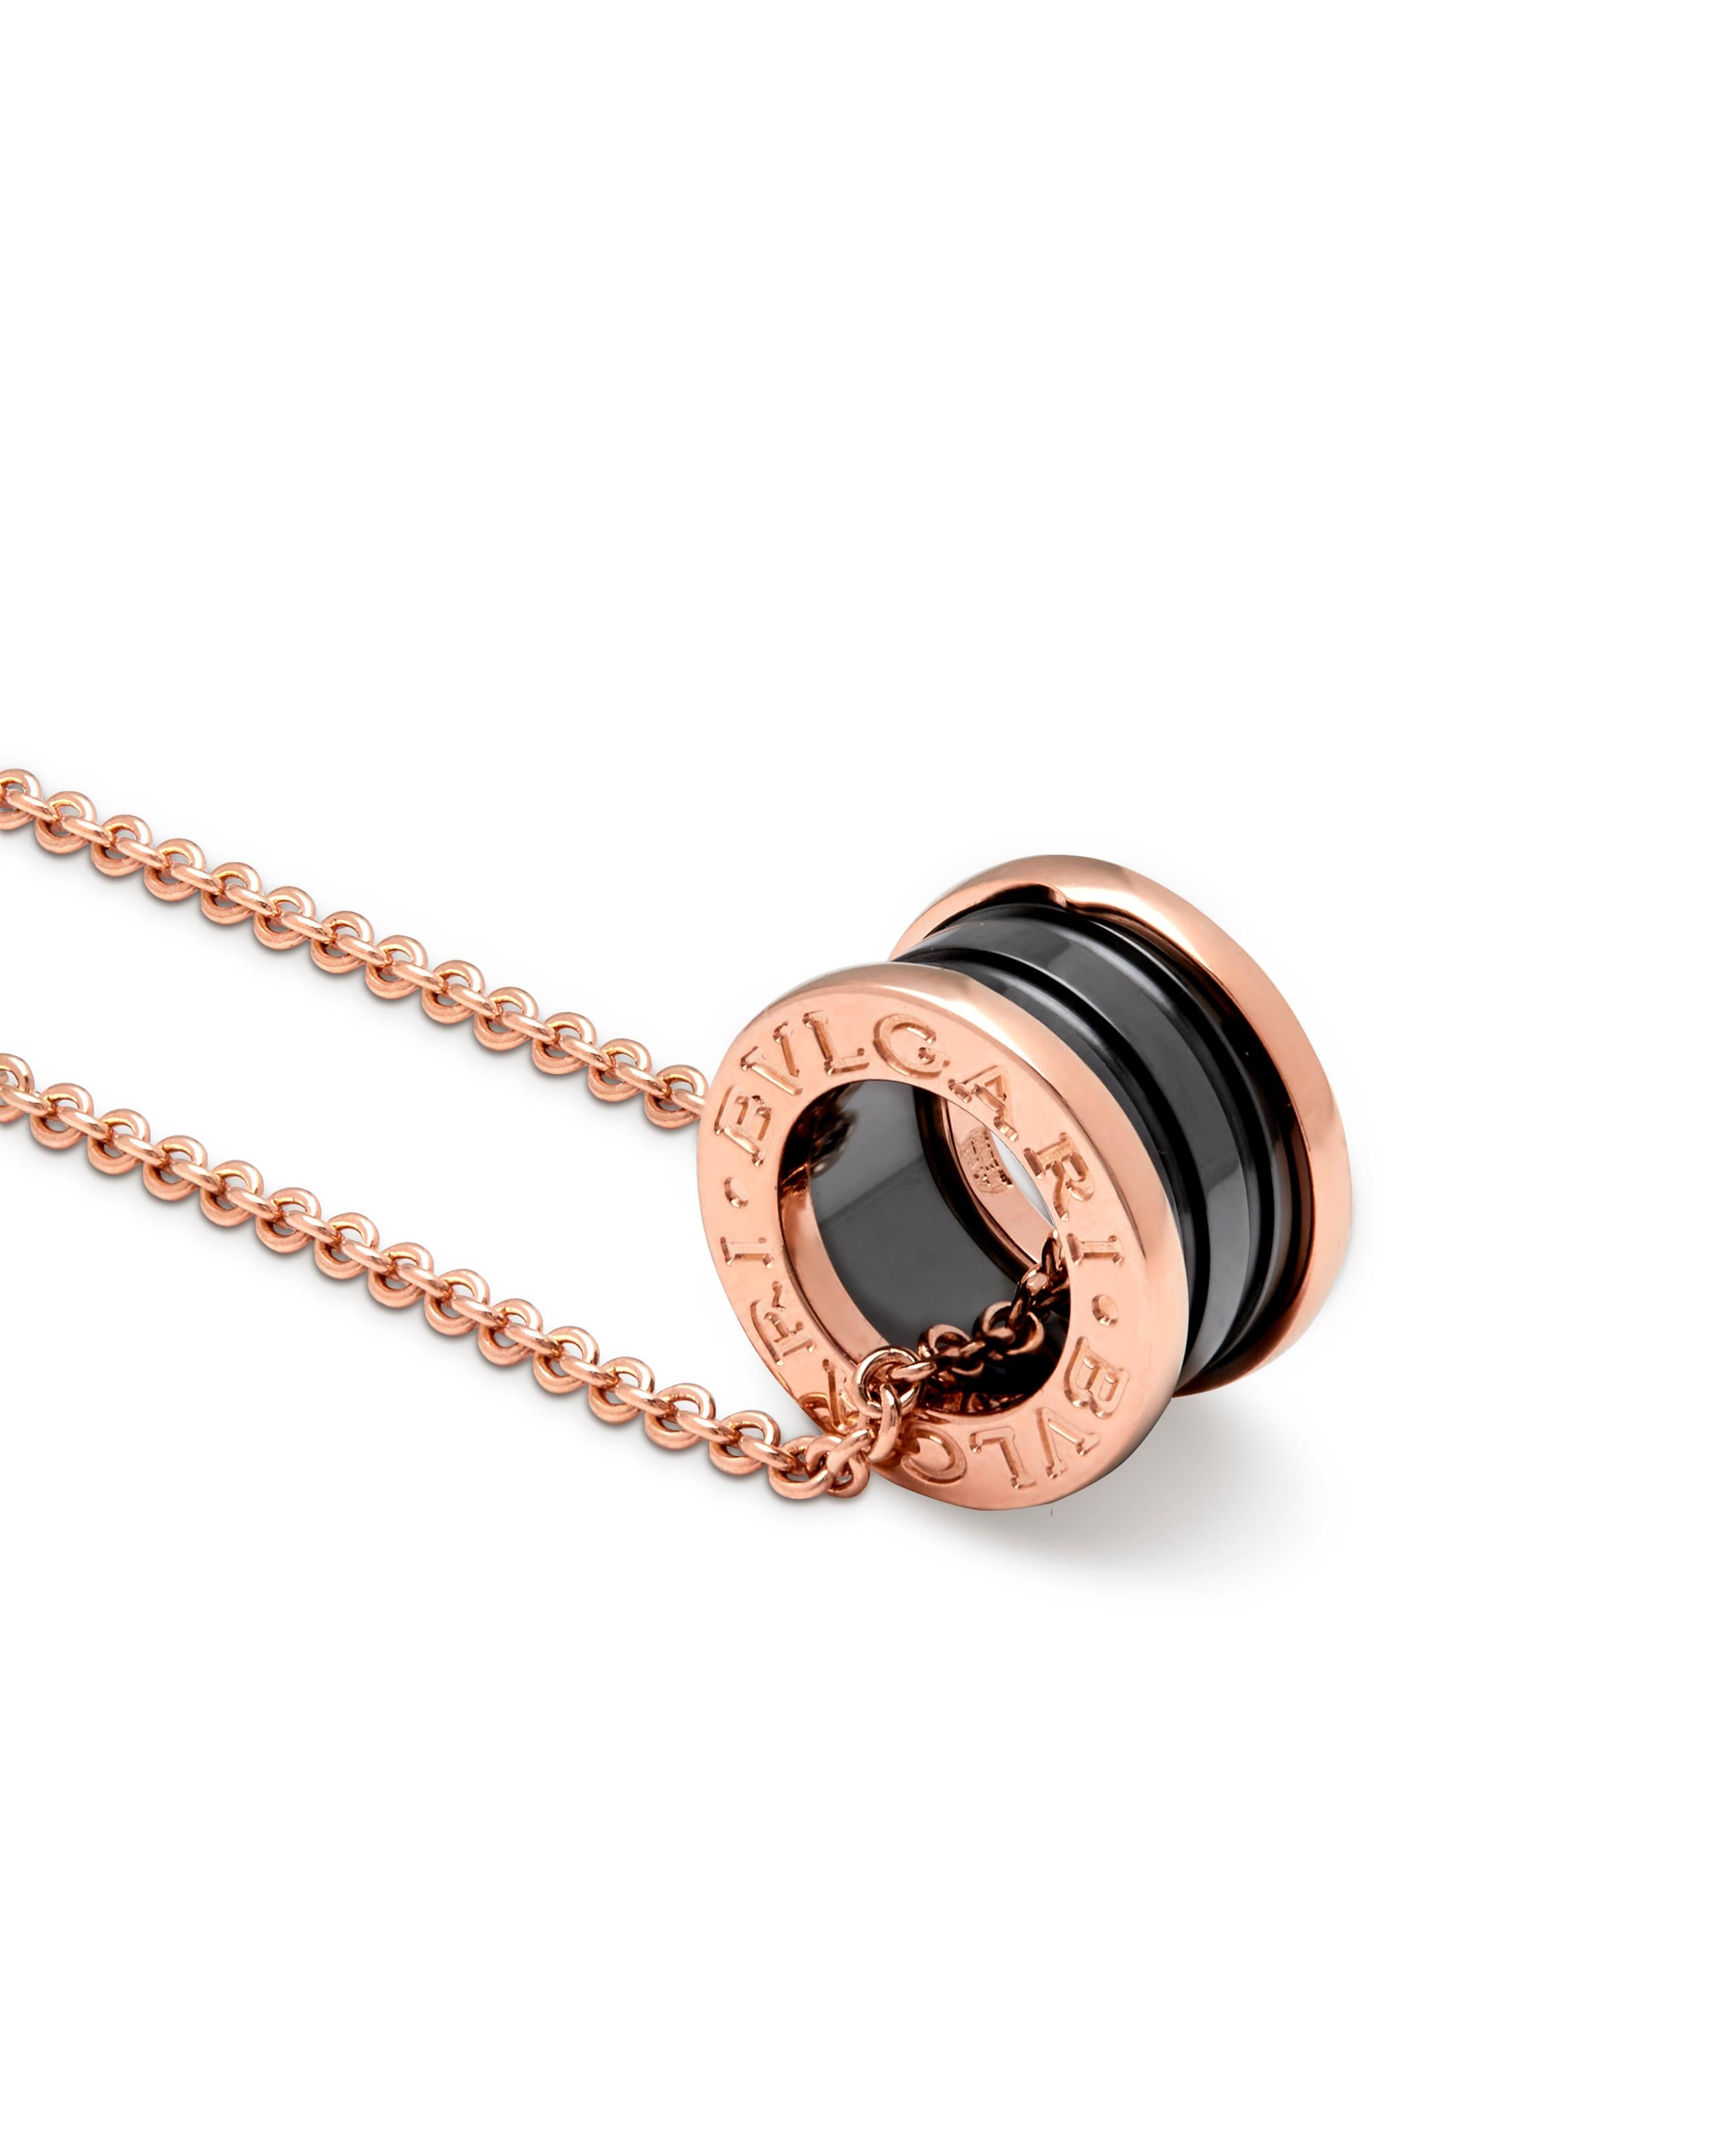 Bulgari B-Zero rose gold and black ceramic pendant model number 358050

This beautiful classic pendant can be worn at 18 inches, with a ring at 17,16,15 inches so you have the option to wear it at different lengths. 

This Bulgari pendant draws its